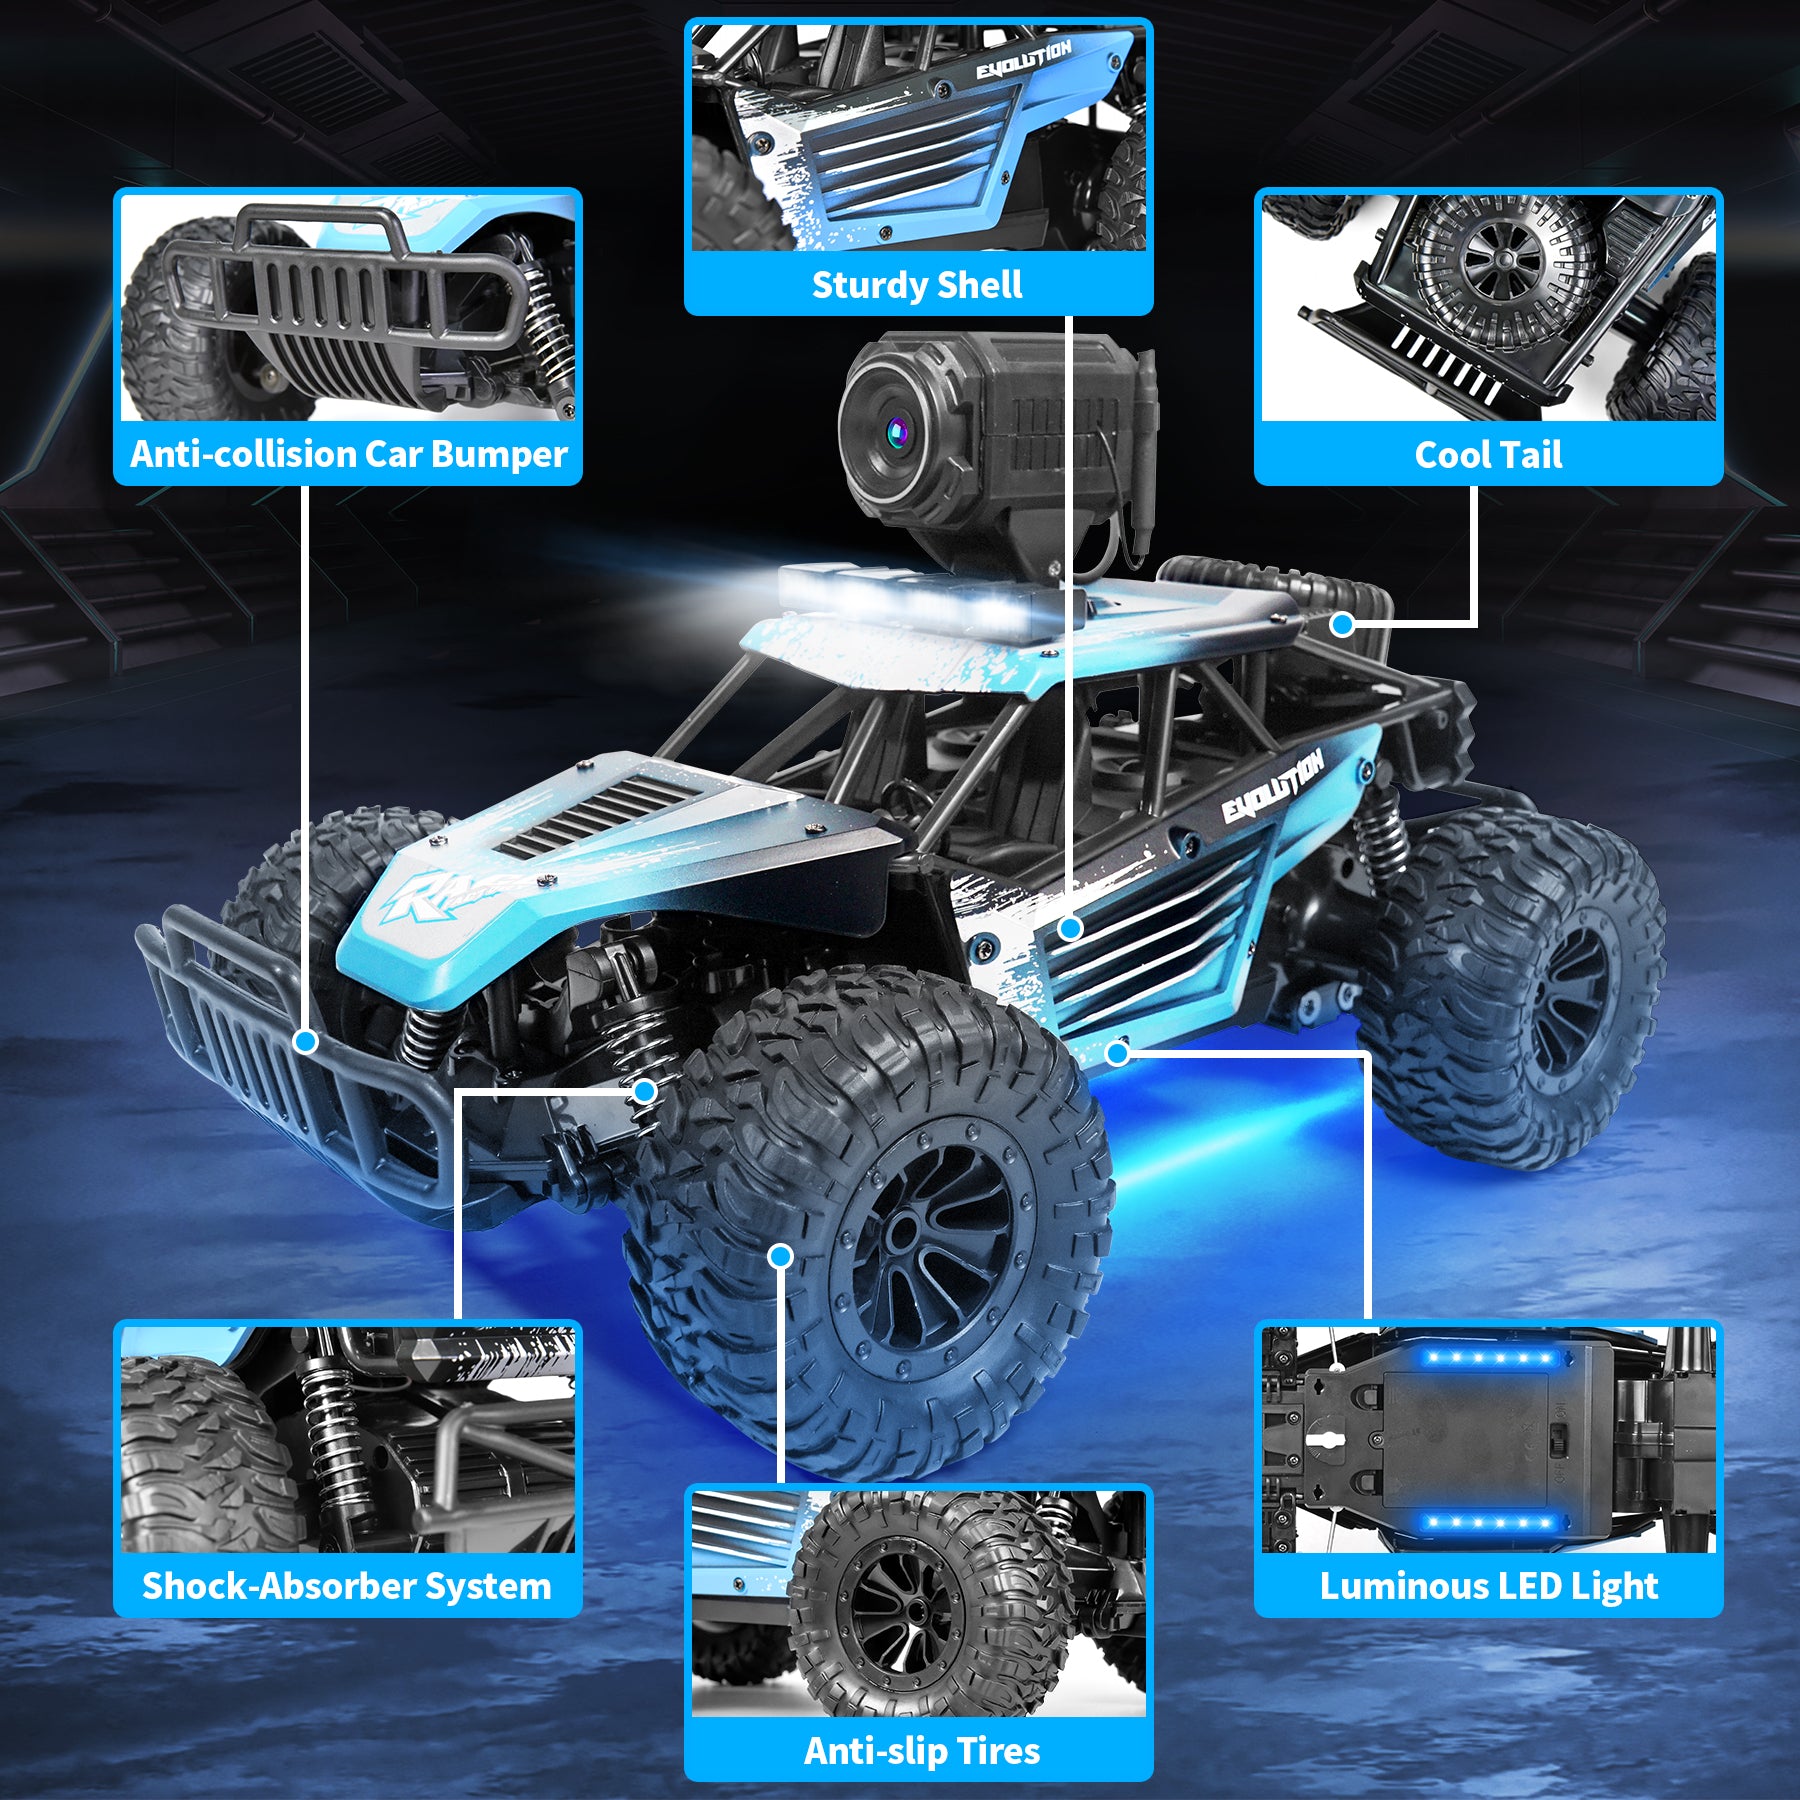 Hosim RC Cars with 1080P HD FPV Camera, 1:16 Remote Control Truck Car High Speed Monster Trucks for Kids Adults Boys & Girls 2 Batteries